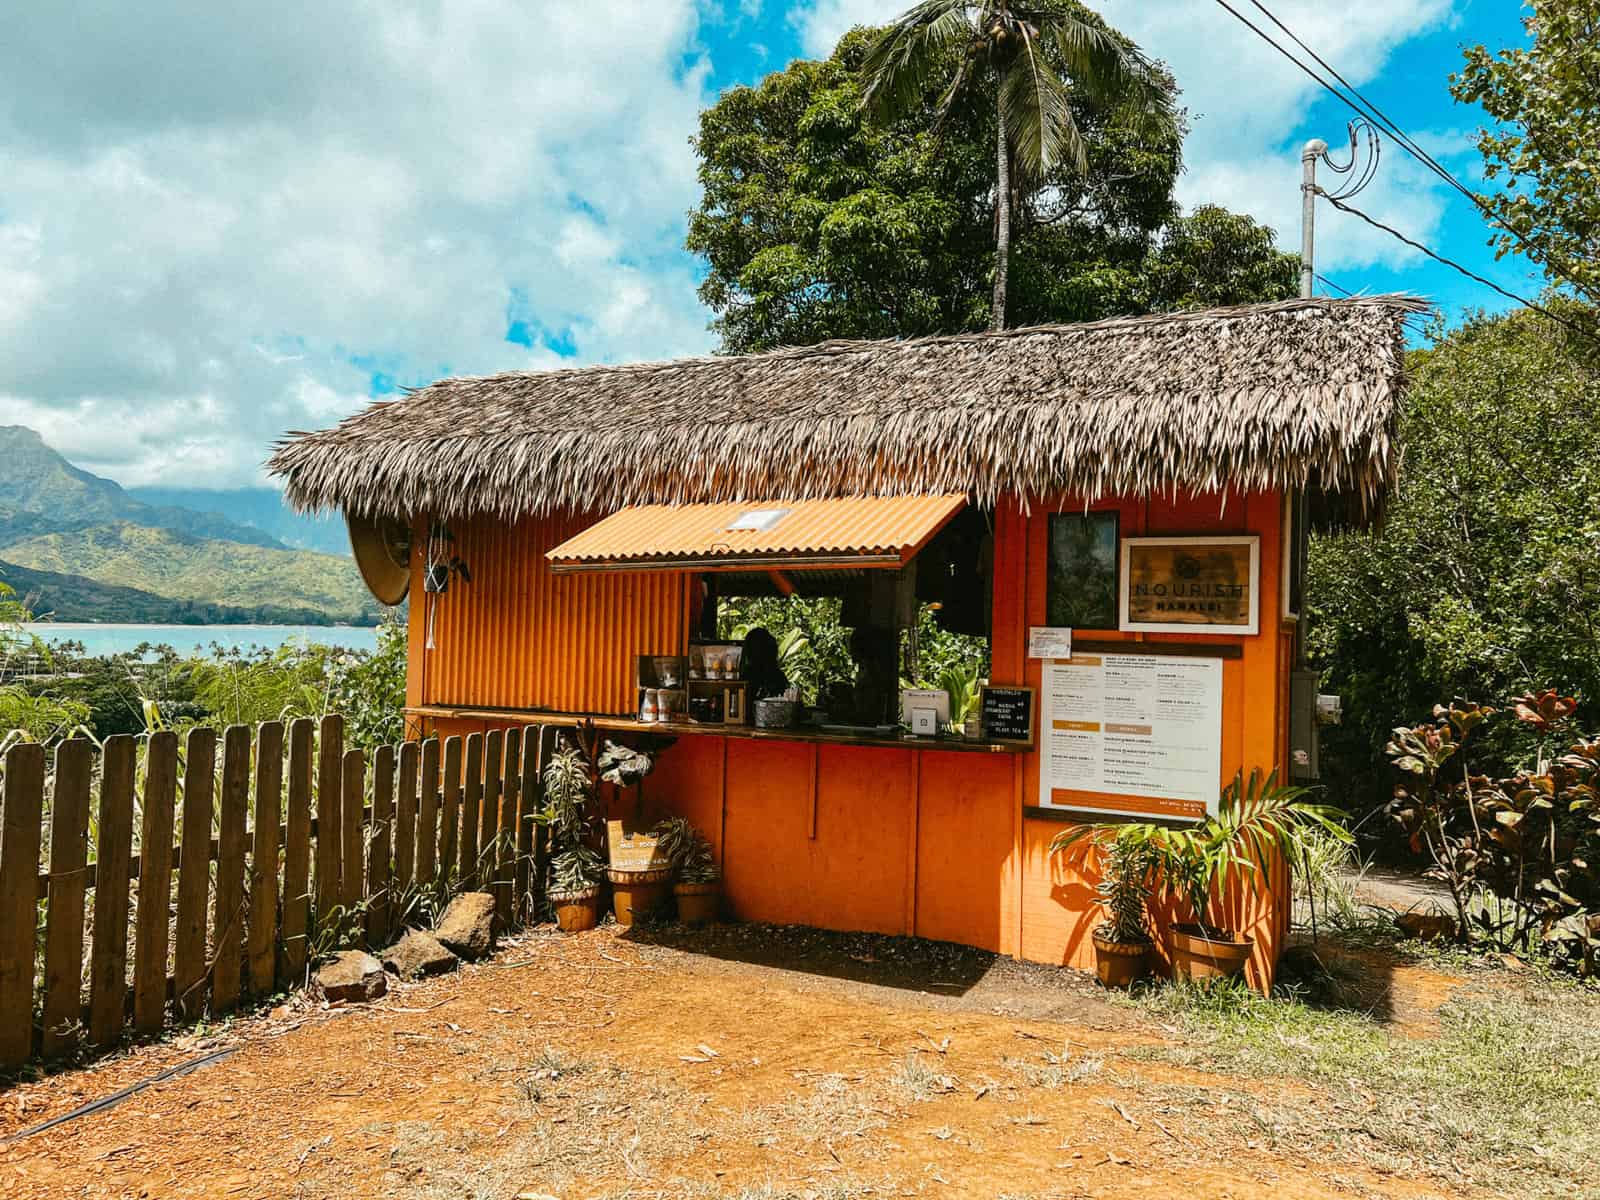 Nourish Hanalei's building that serves smoothies, acai bowls, and more.